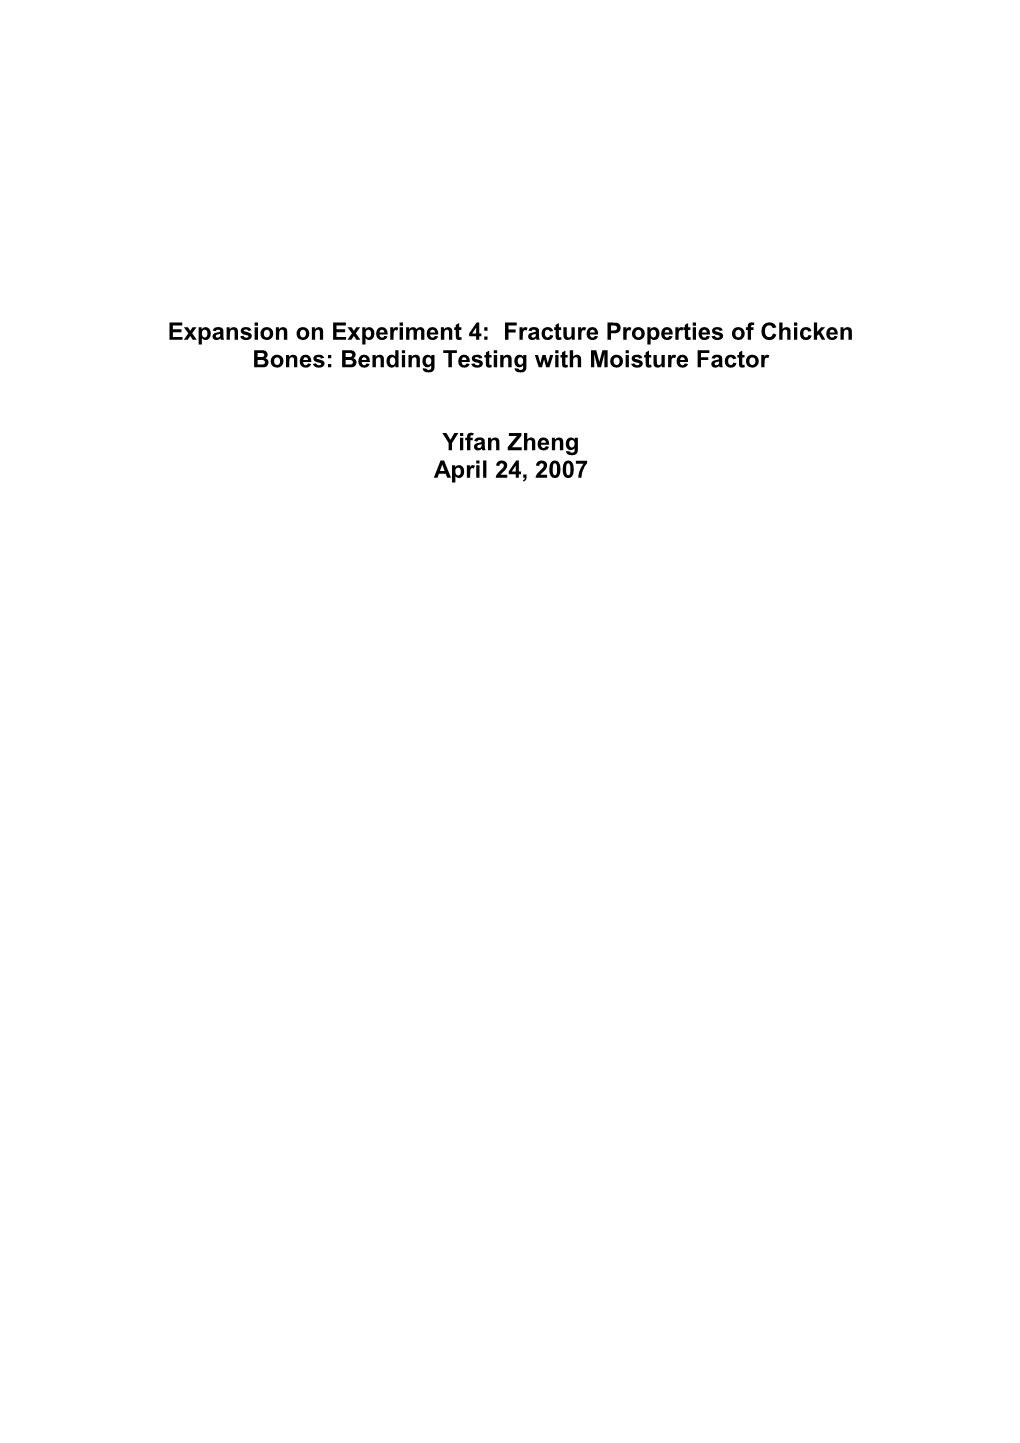 Expansion on Experiment 4: Fracture Properties of Chicken Bones: Bending Testing With